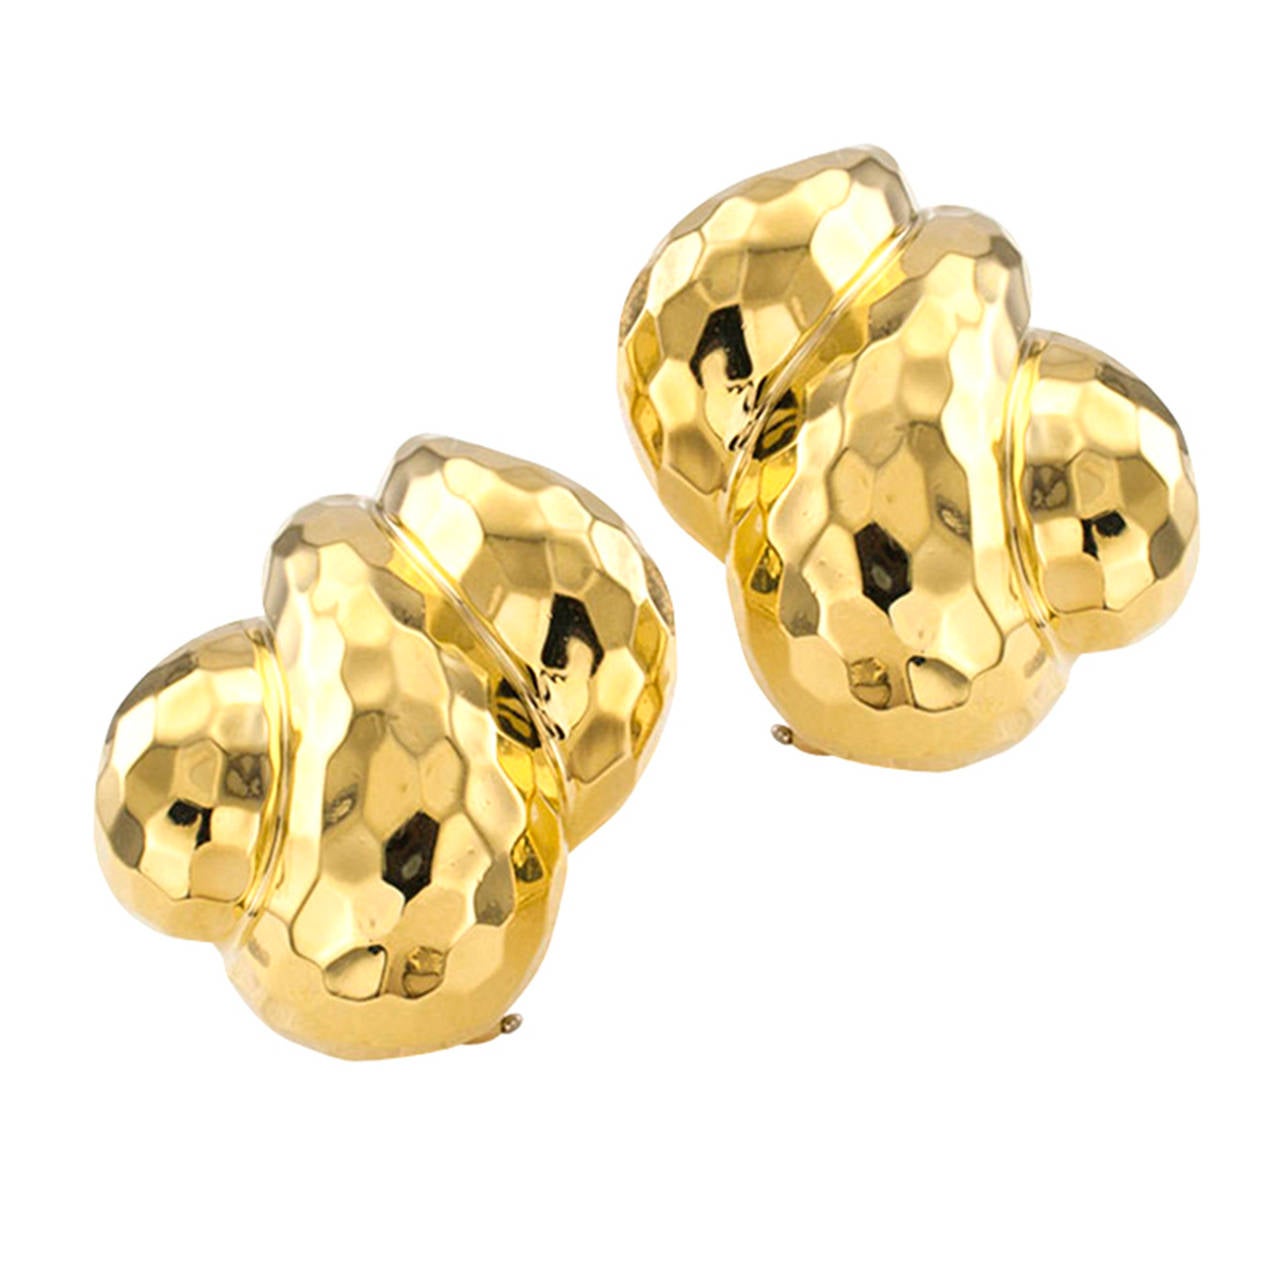 Most definitely, statement making earrings, designed for the woman who has the greatest appreciation for classic, understated elegance.  The left and right matching designs feature a bulbous motif partitioned into three curved and domed sections,